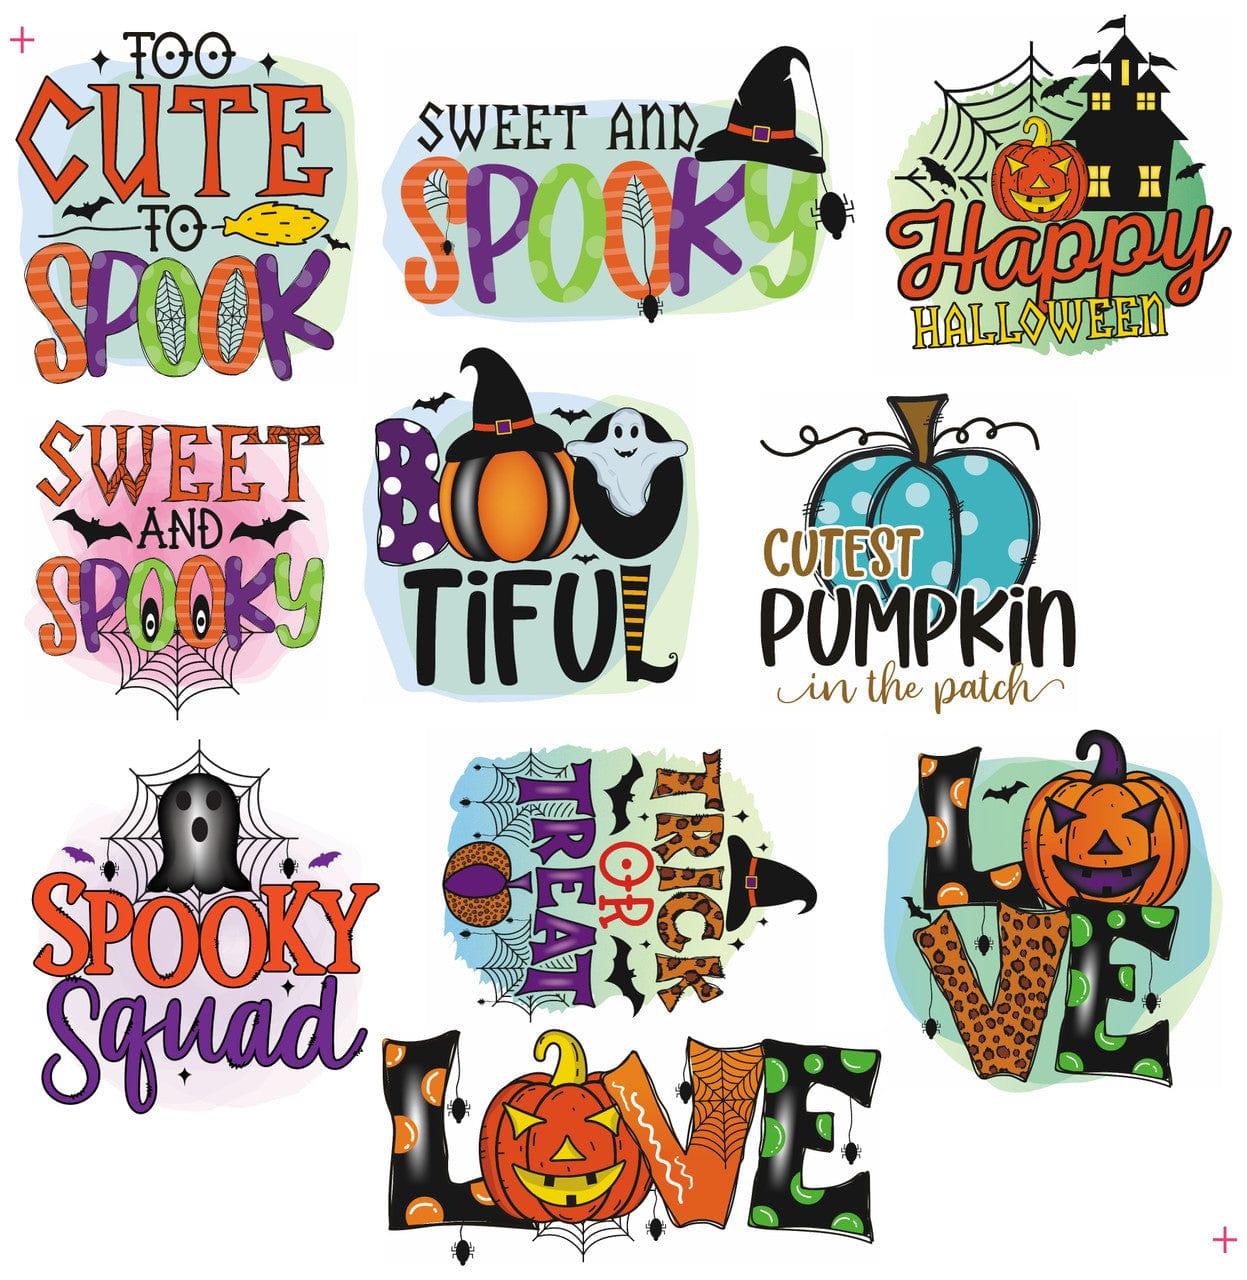 Quirky Quotes Collection Halloween Sayings Laser Cut Scrapbook or Card Embellishments by SSC Laser Designs - 10 Pieces